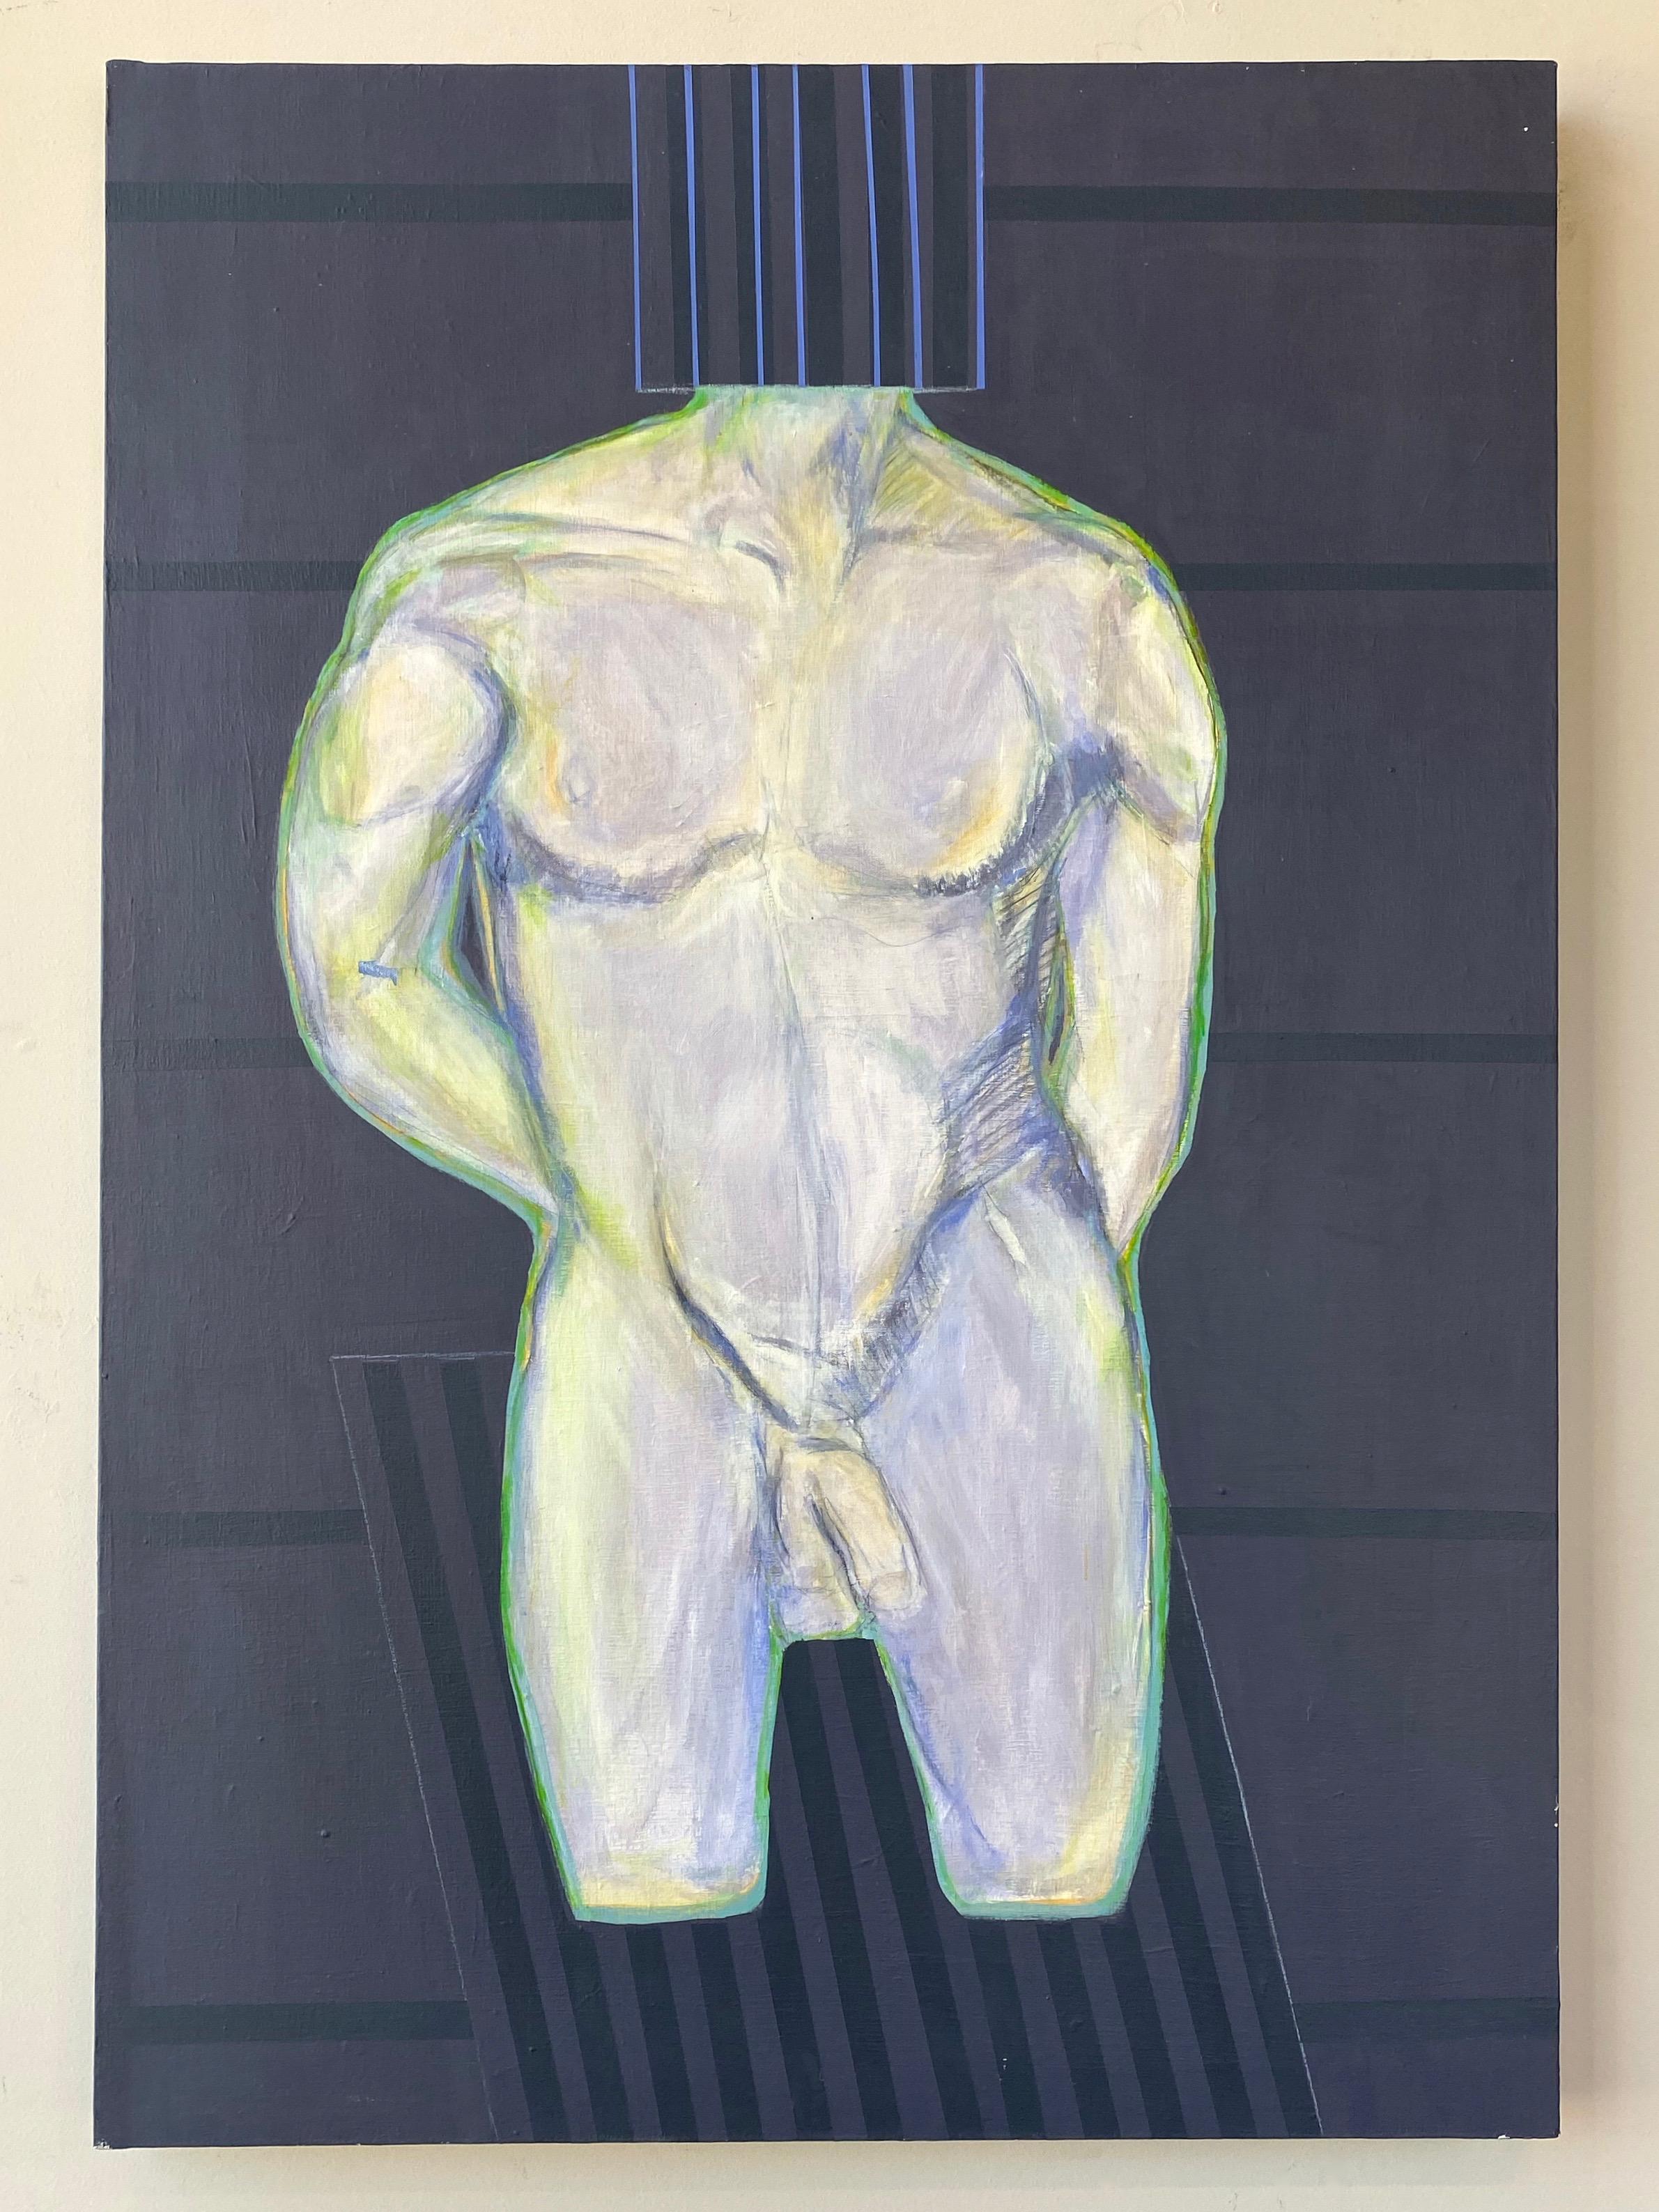 A 1980s large and arresting abstract expressionist acrylic portrait painting of a male nude torso by Robert English.

Very well built gentleman sans head and lower legs strikes a confidently casual pose. Nicely rendered figure study-like subject is